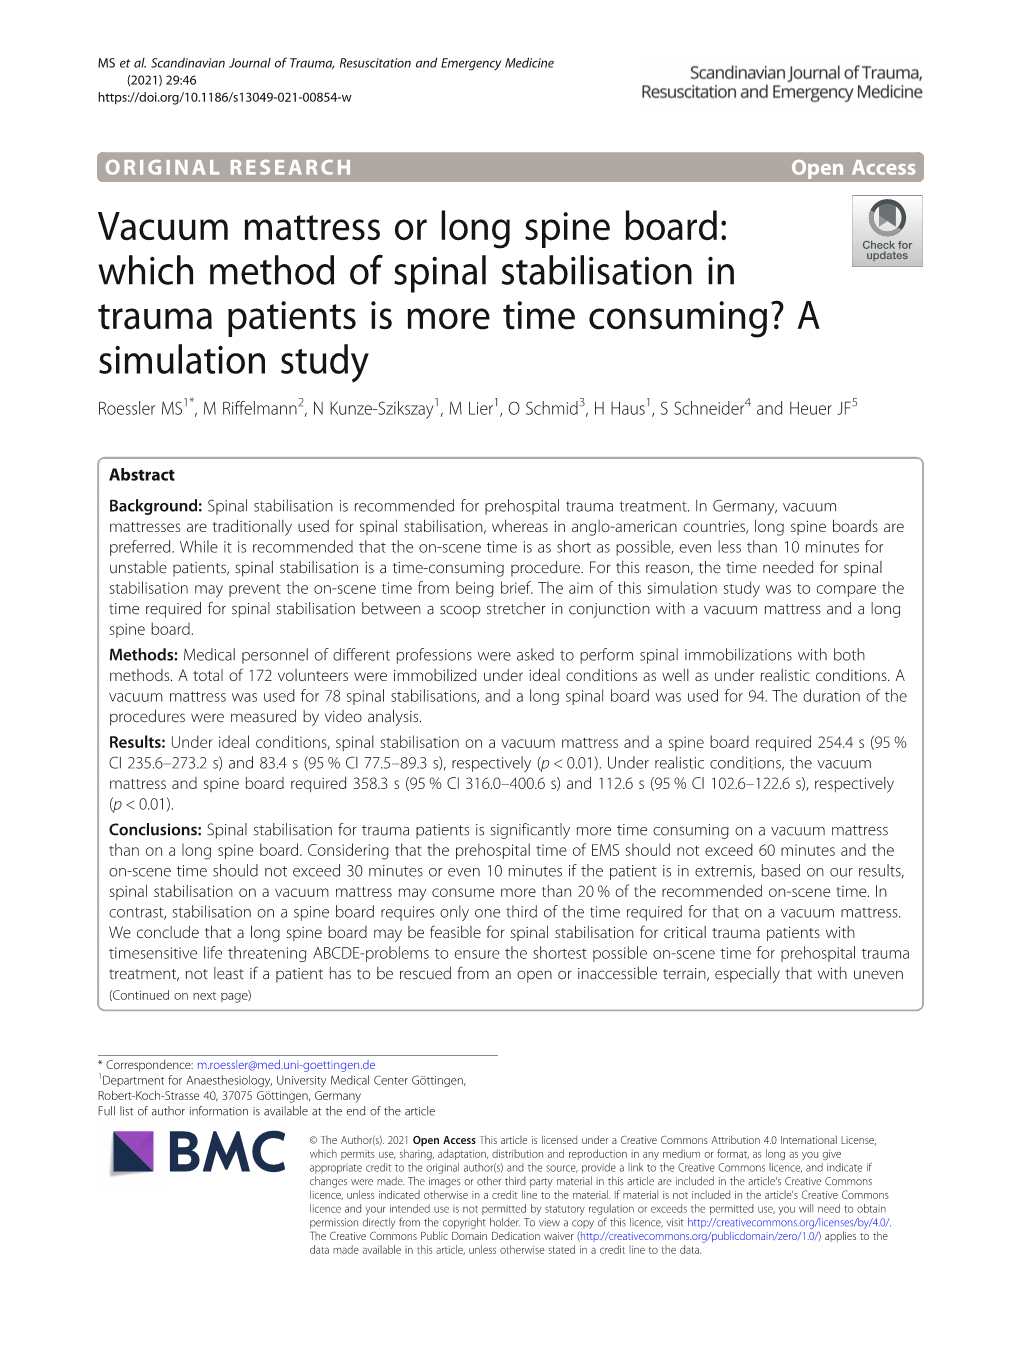 Vacuum Mattress Or Long Spine Board: Which Method of Spinal Stabilisation